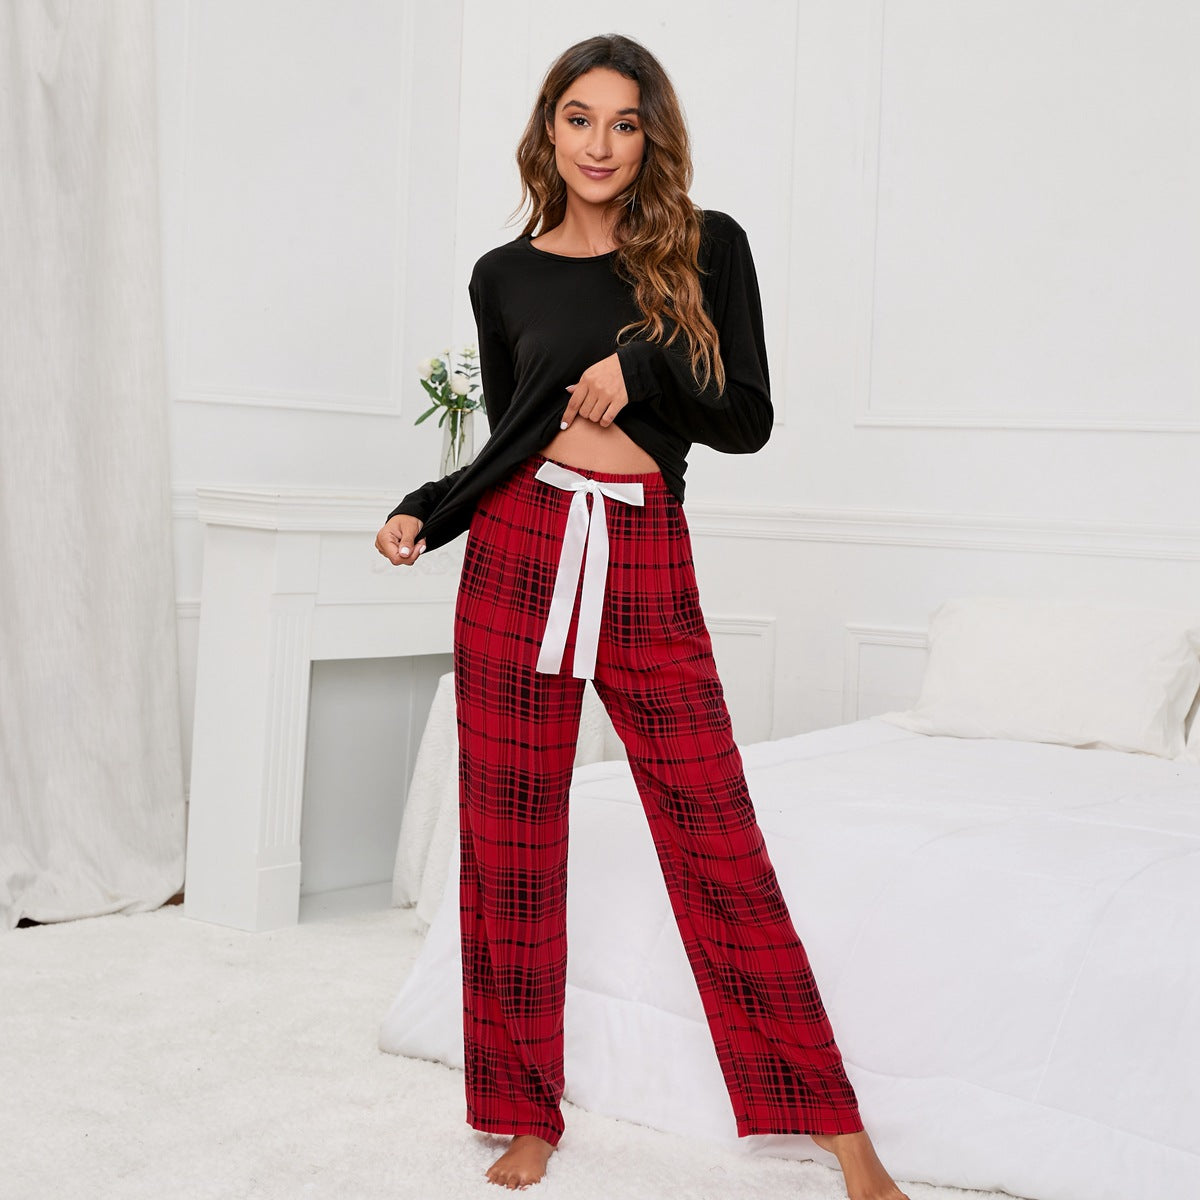 Solid Color round Neck T Printed Checks Women Casual Suit Homewear Pajamas Women